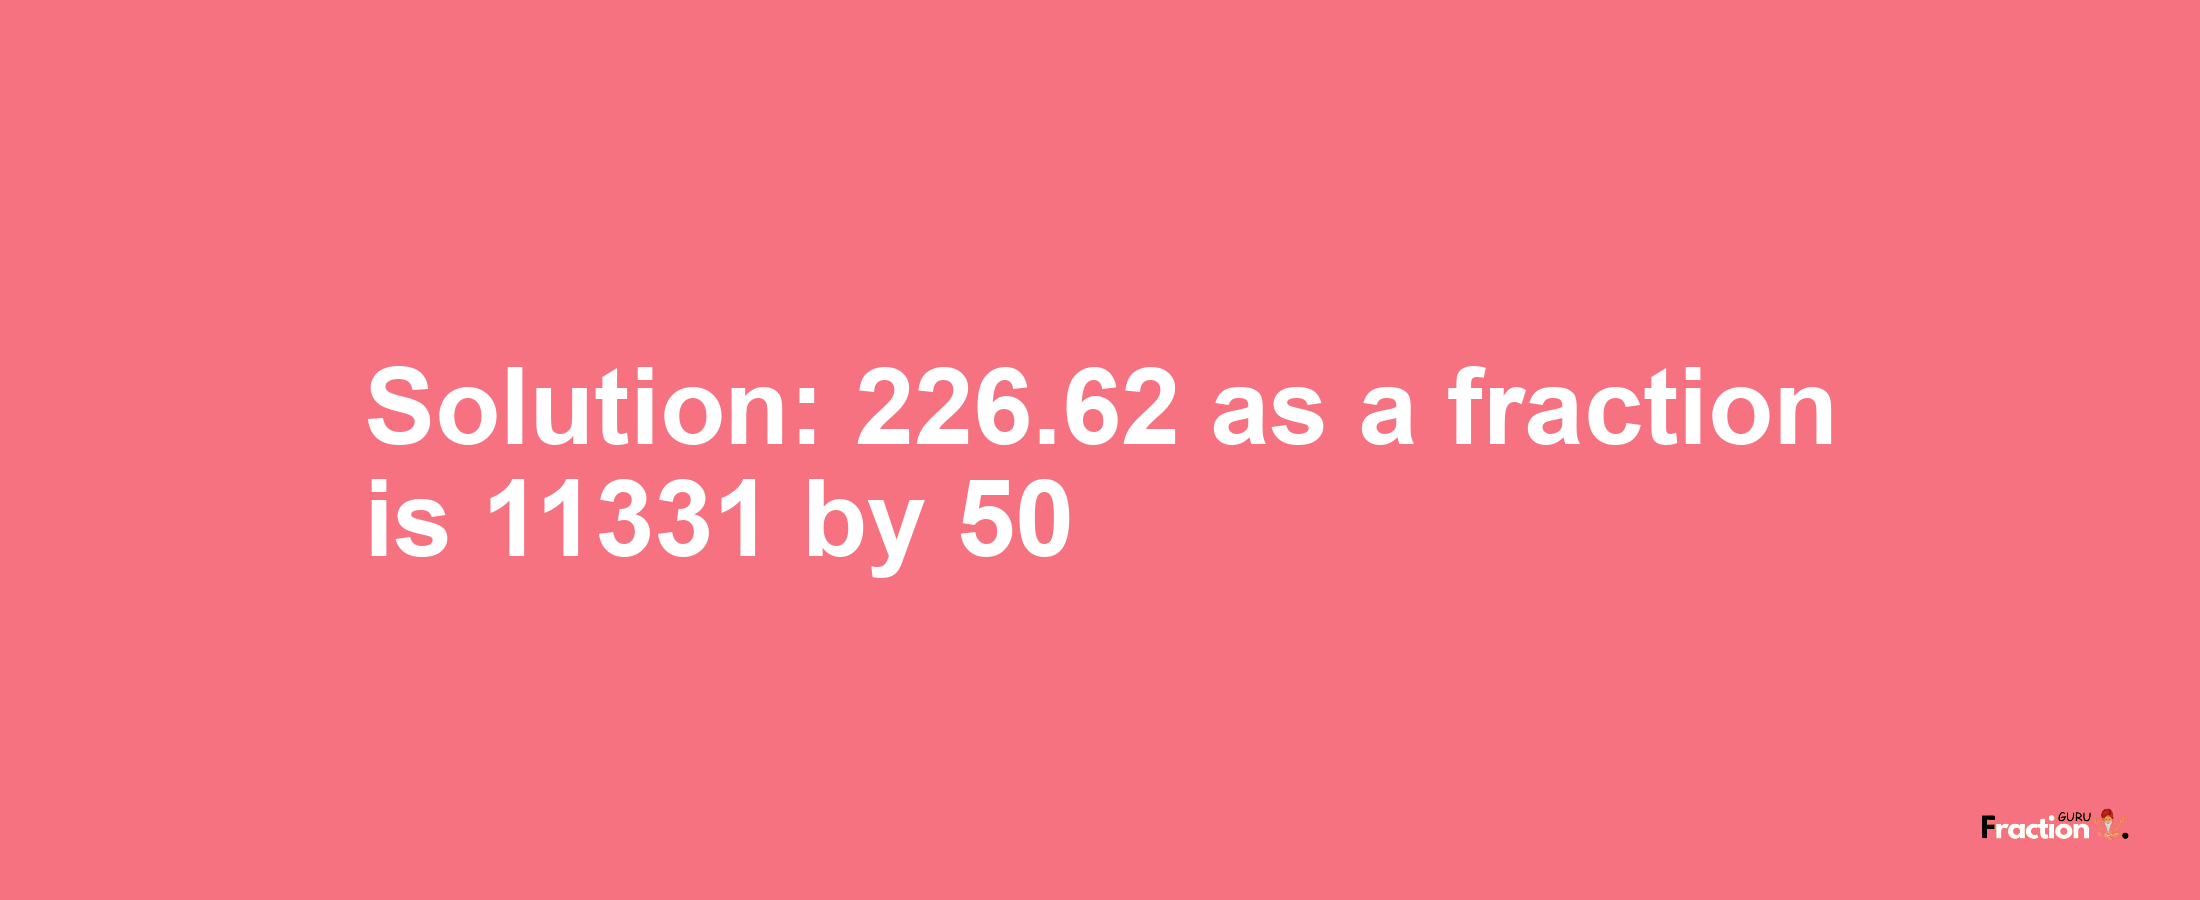 Solution:226.62 as a fraction is 11331/50